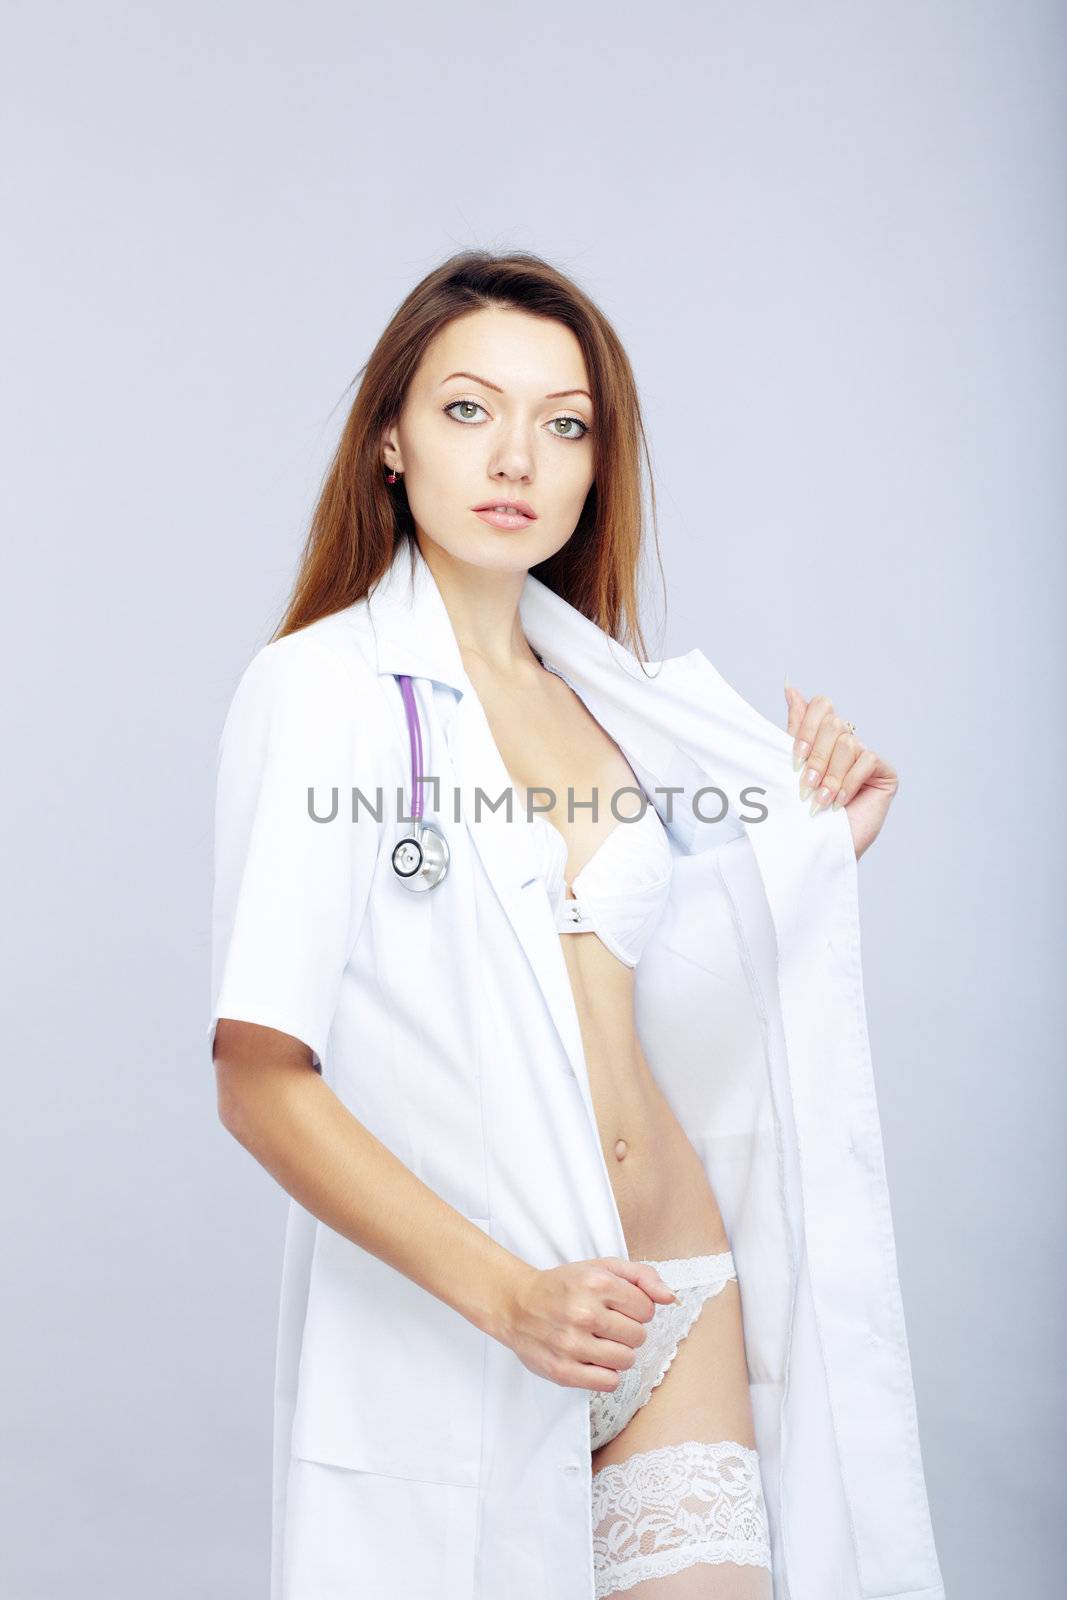 Sexy female doctor revealing medical uniform with stethoscope